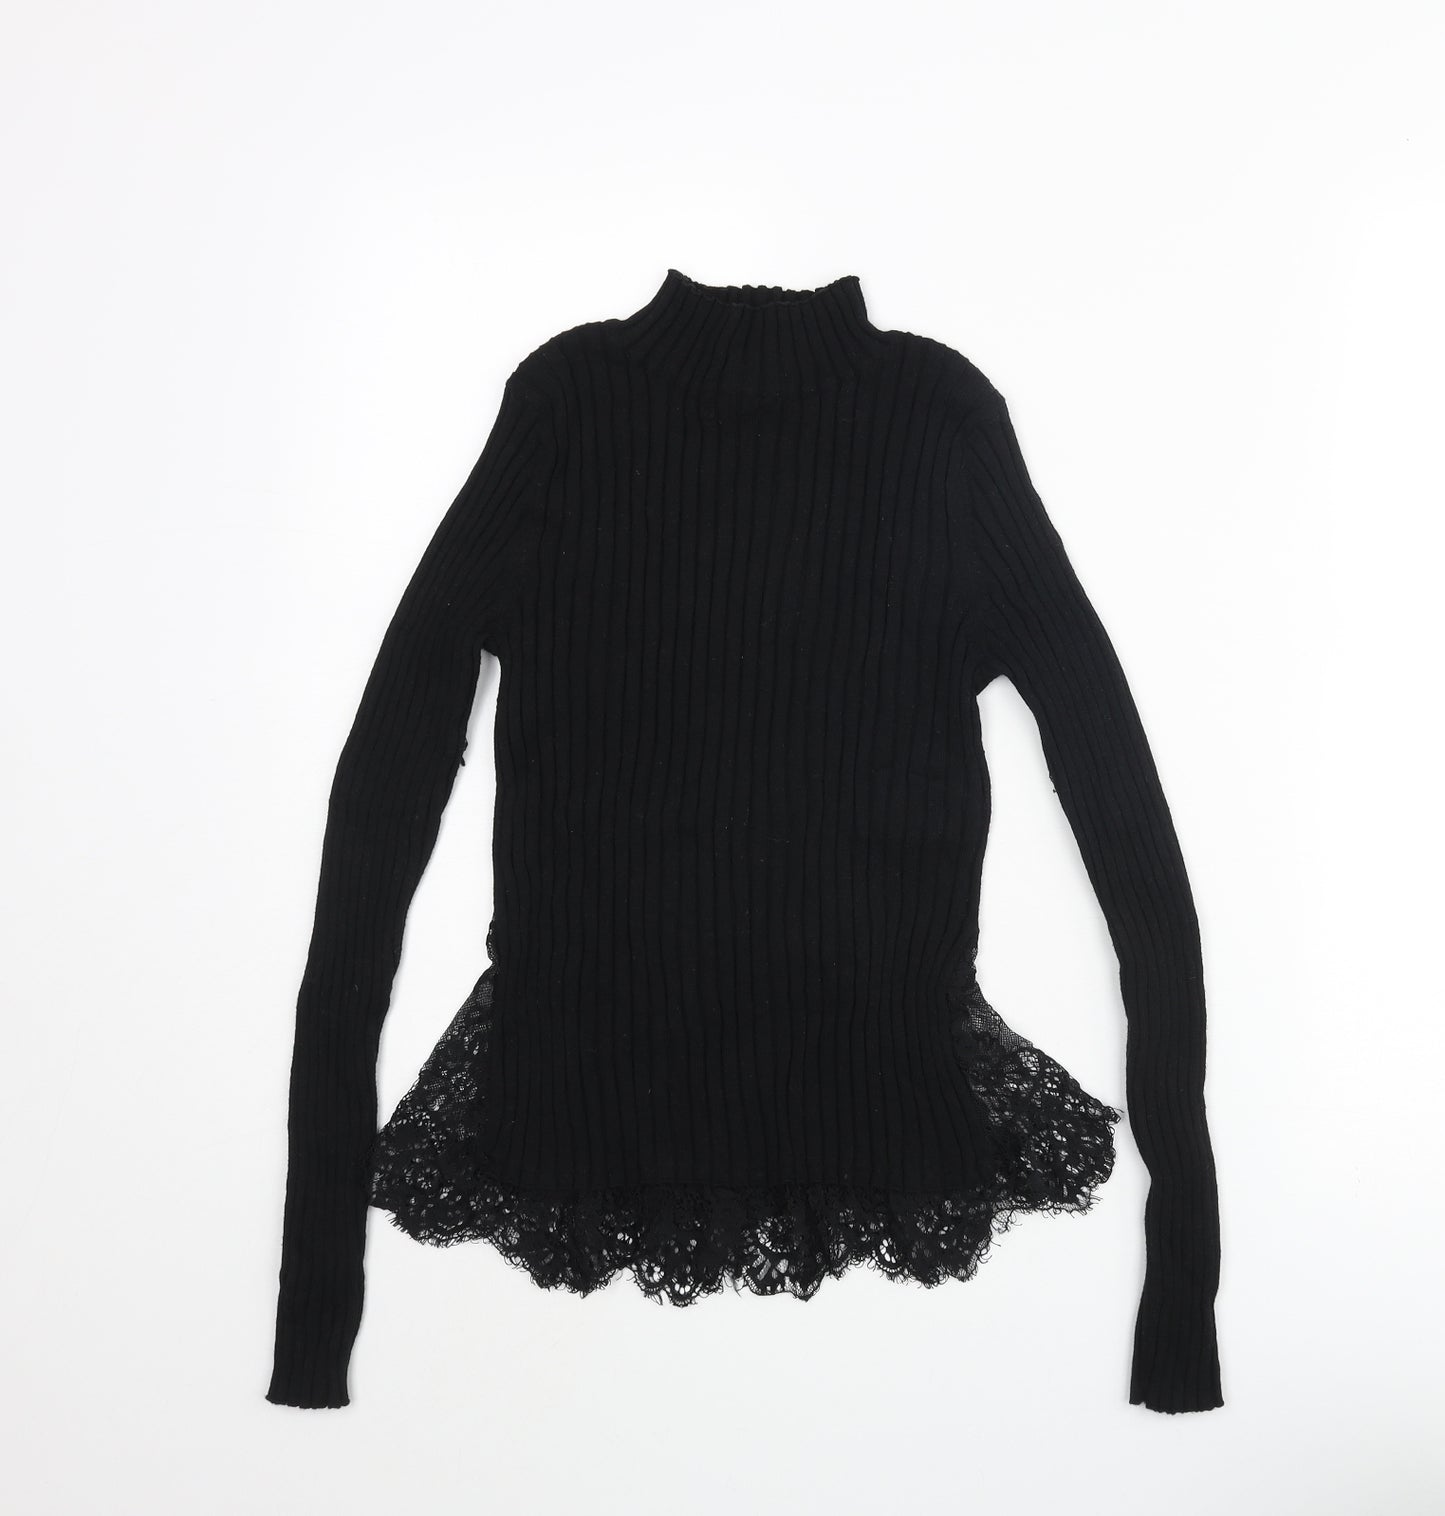 French Connection Womens Black Mock Neck Cotton Pullover Jumper Size L - Lace Hem